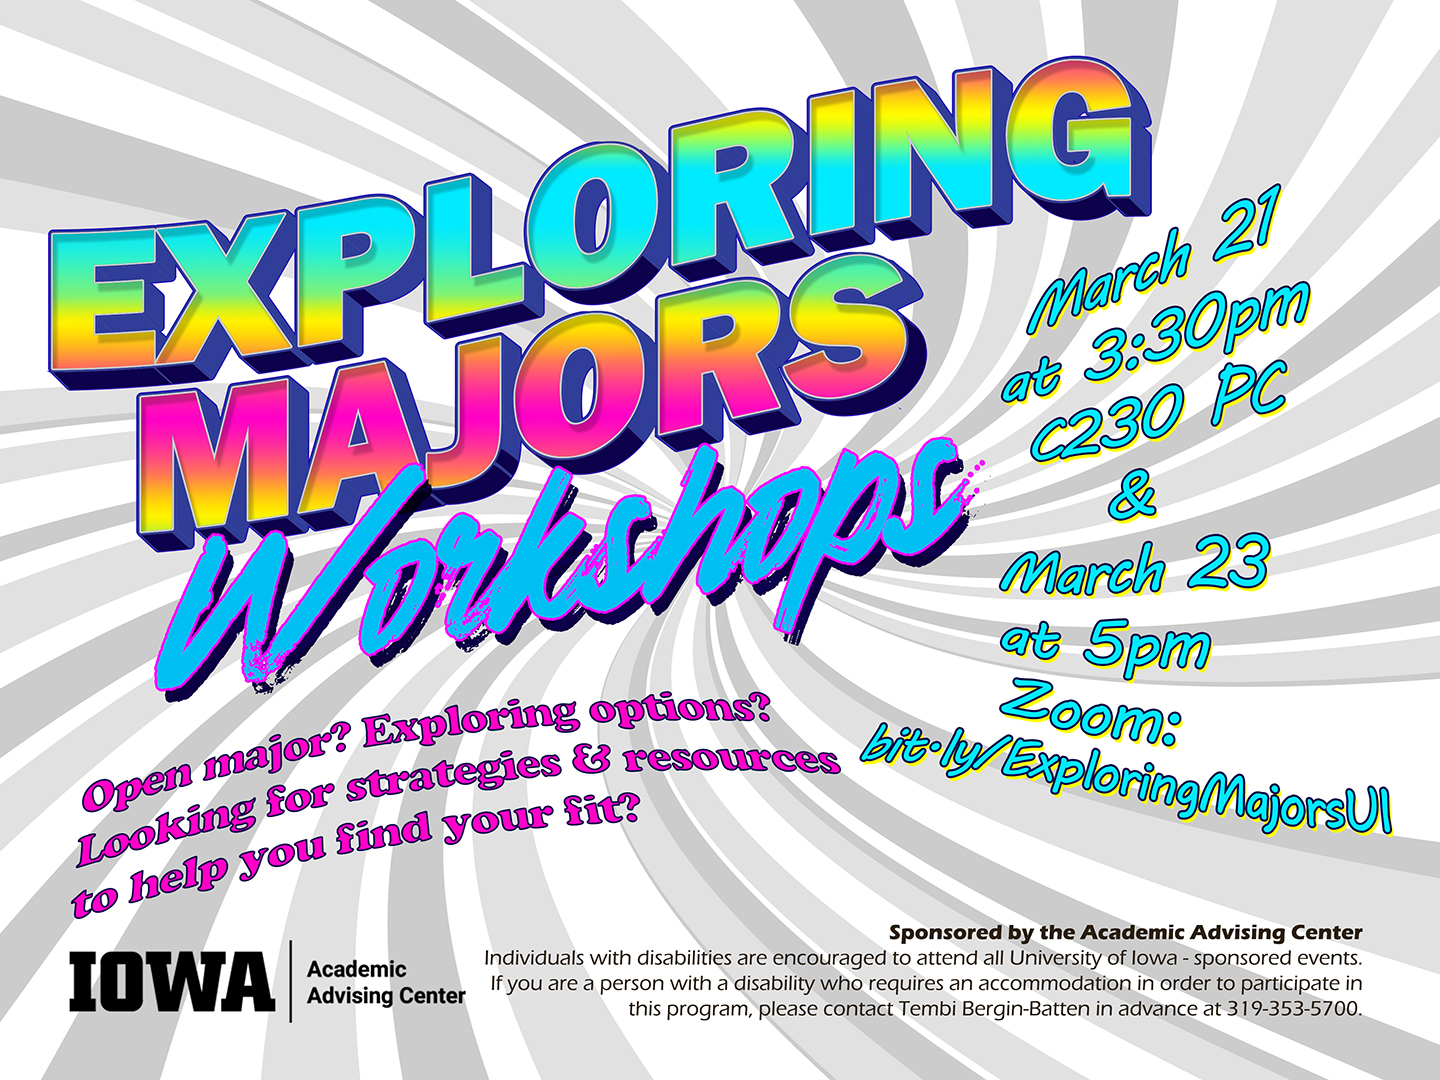 gray swirling background with colorful text: “Exploring Majors Workshops/ March 21 at 3:30pm in C230 PC / March 23 at 5pm on Zoom: bit.ly/ExploringMajorsUI 